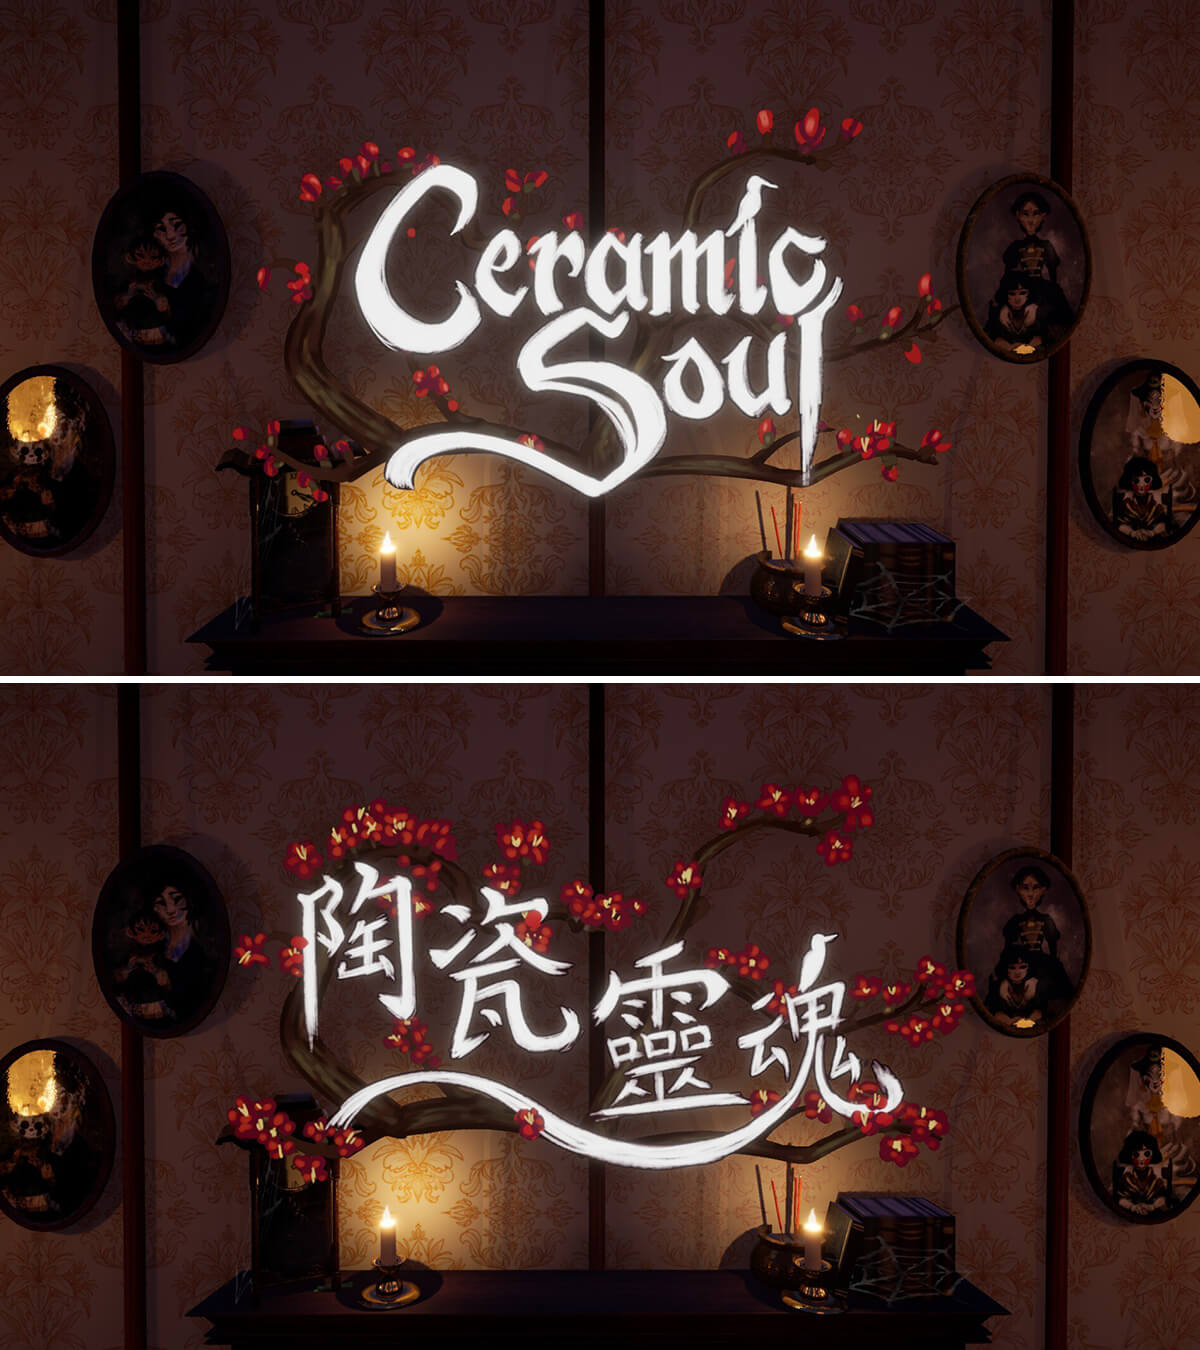 Ceramic Soul’s title cards, one in English, and another in Chinese.